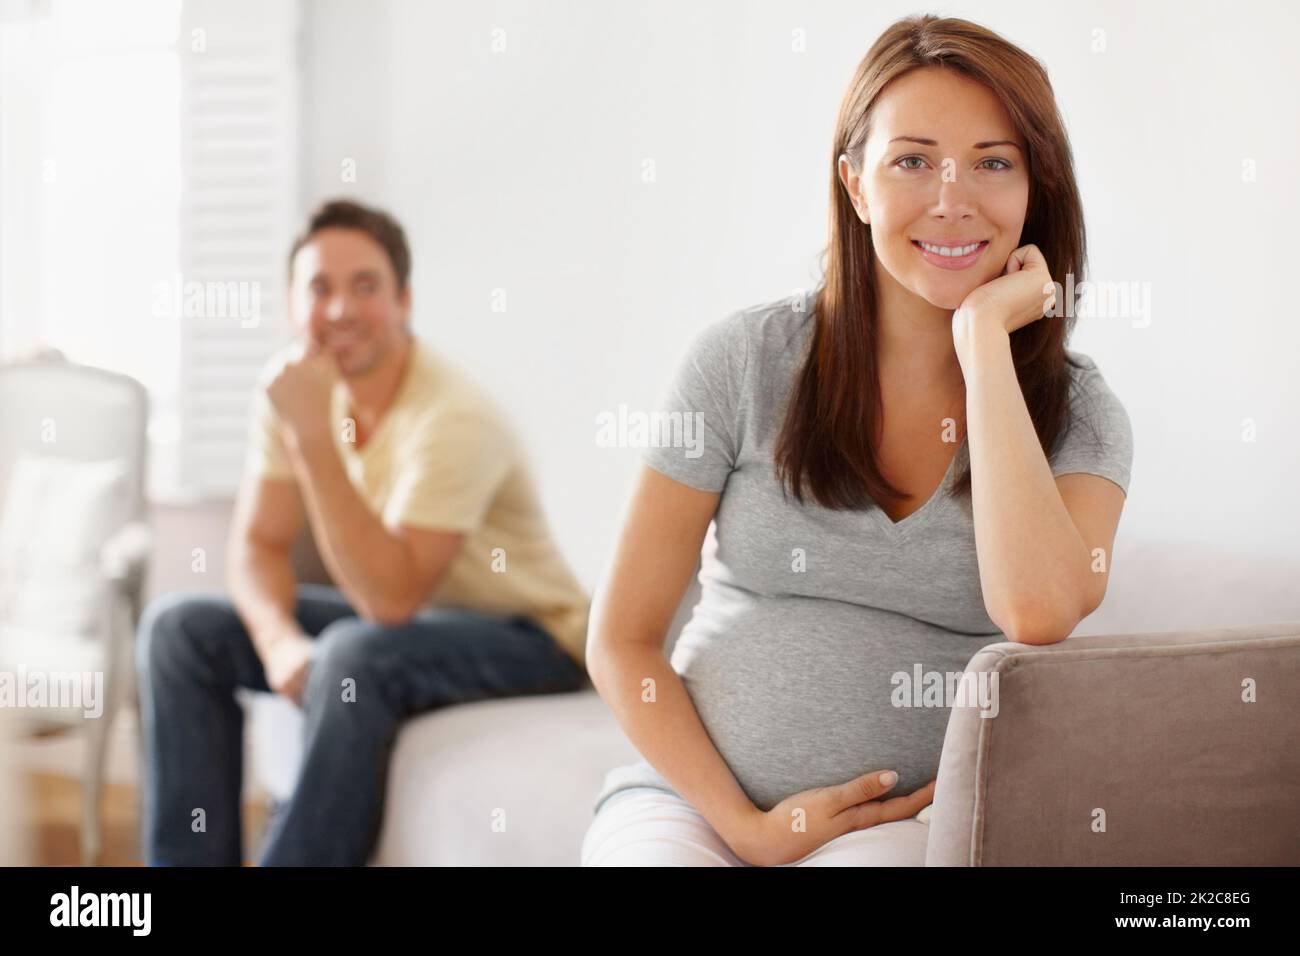 She wants a girl and he wants a boy. Portrait of a pretty young pregnant woman with her spouse sitting in the background. Stock Photo